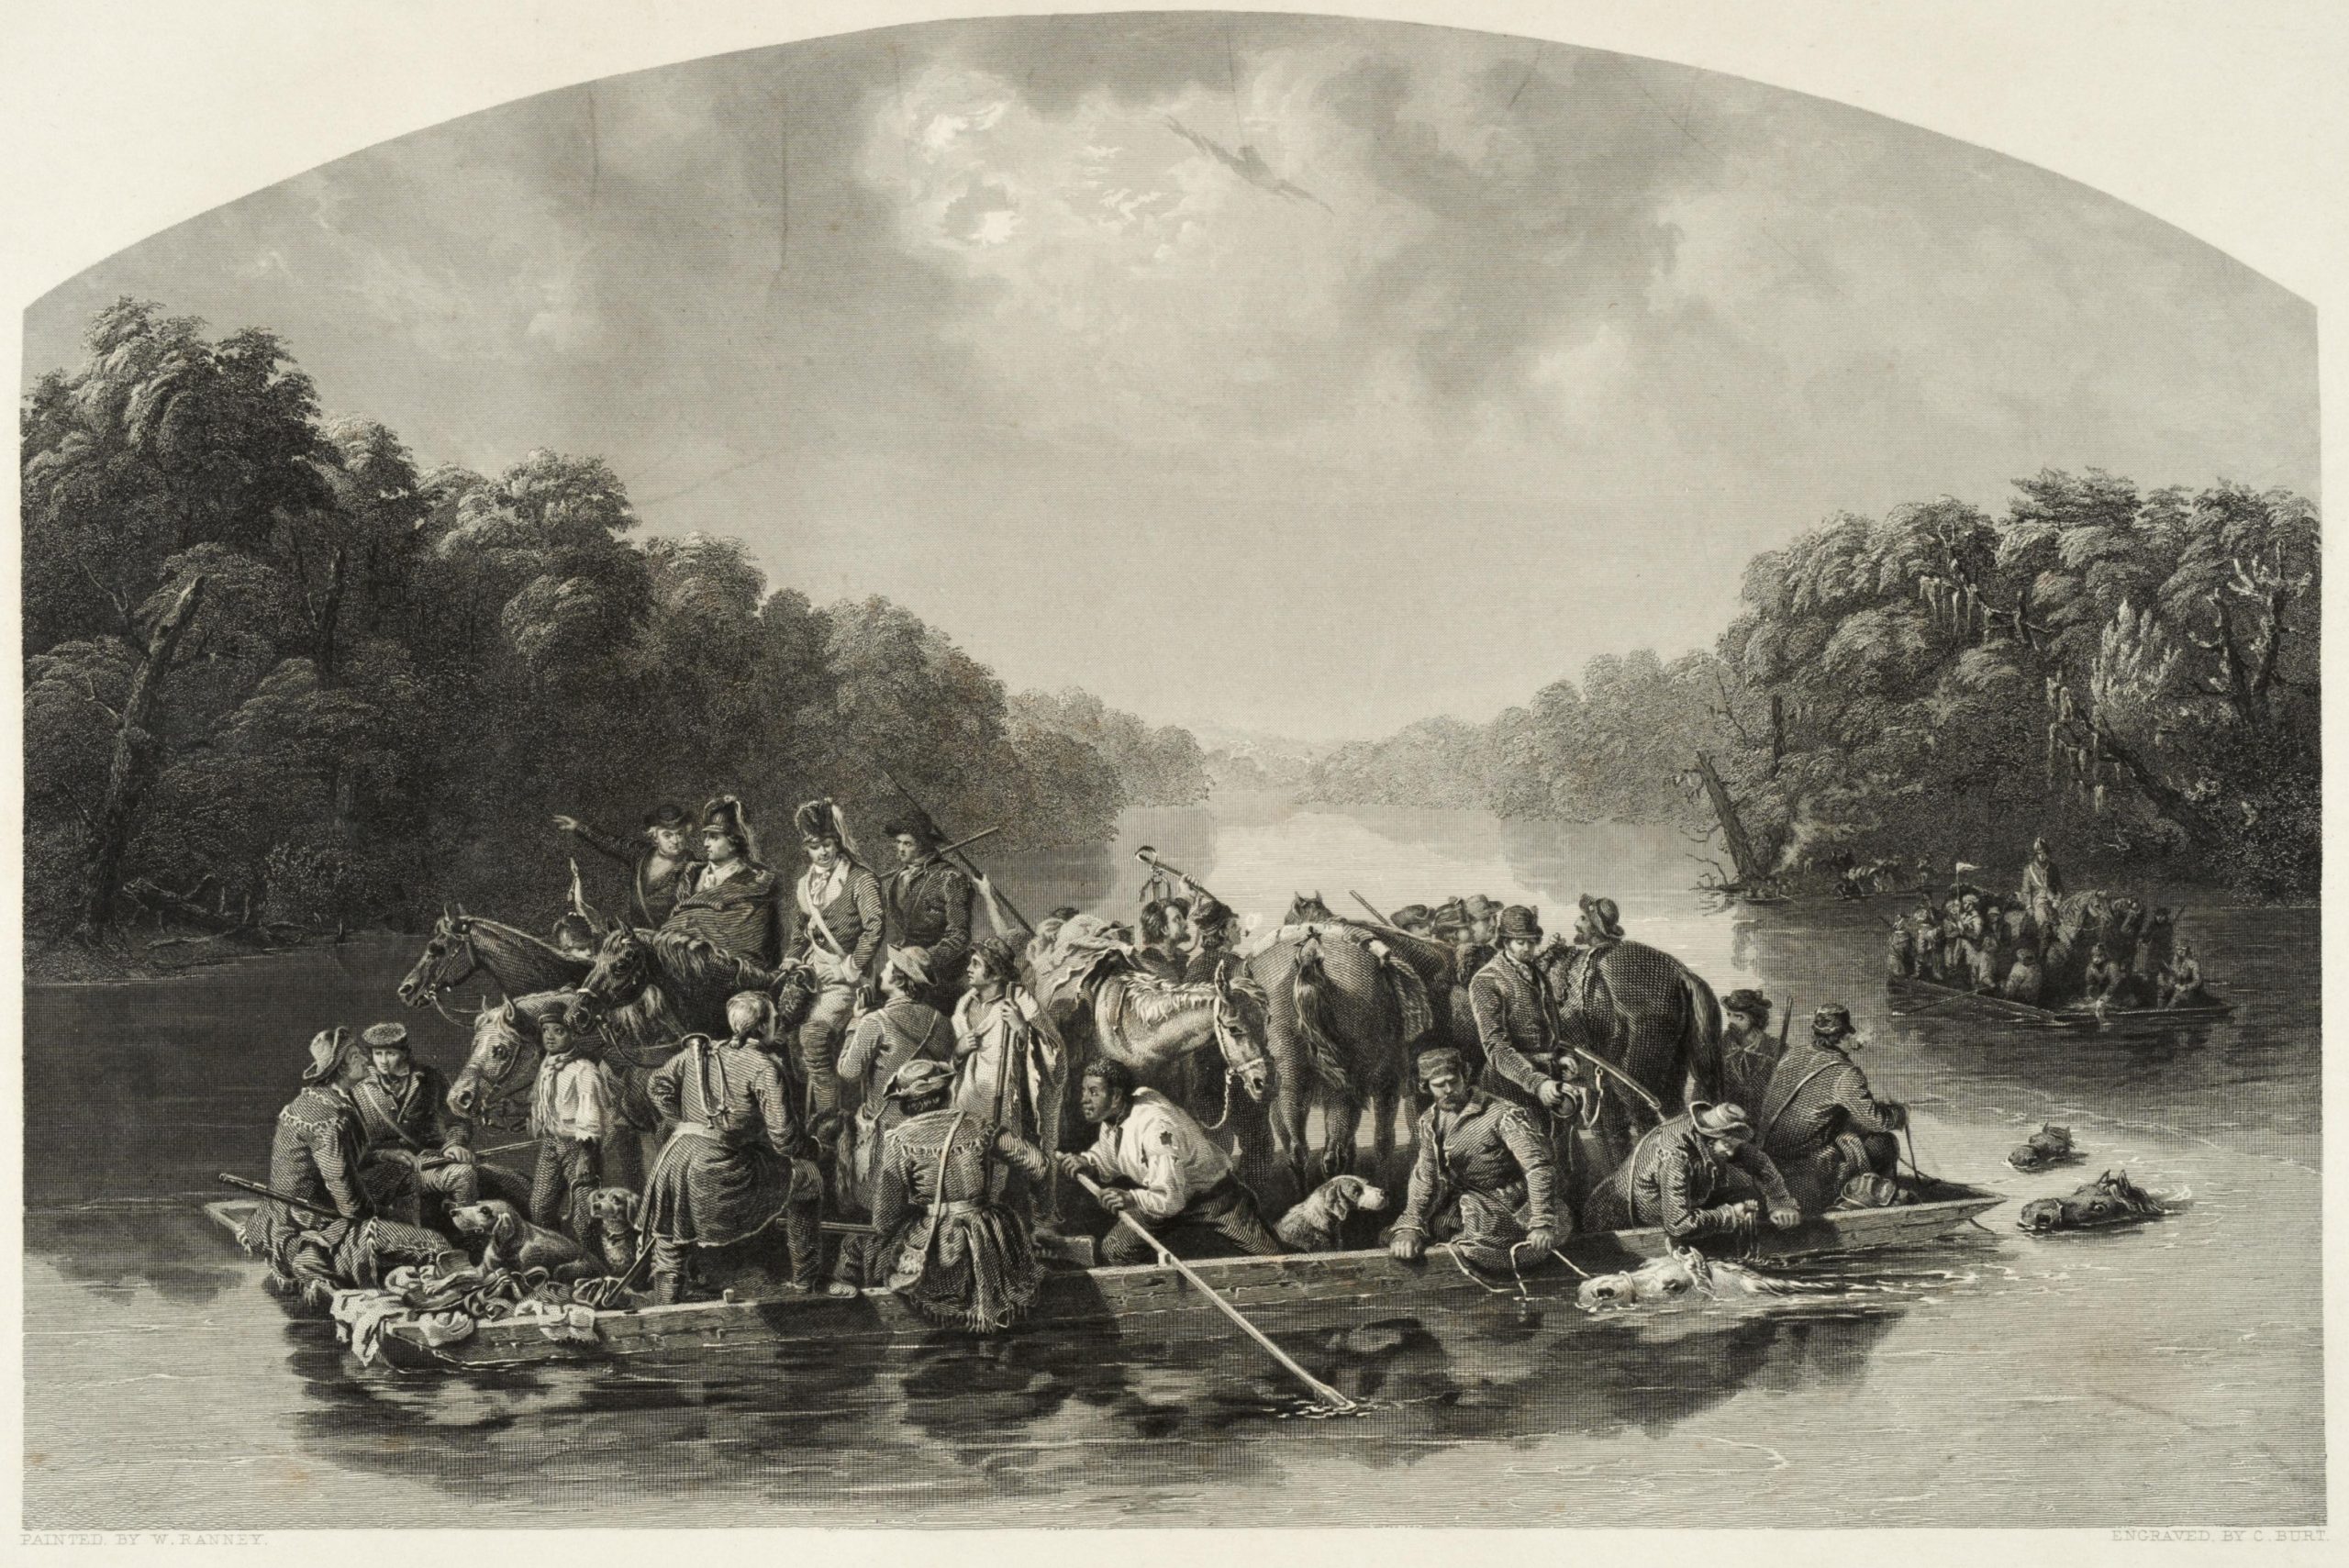 This Charles Kennedy Burt engraving reproduces William Tylee Ranney's Maron Crossing the Peede.